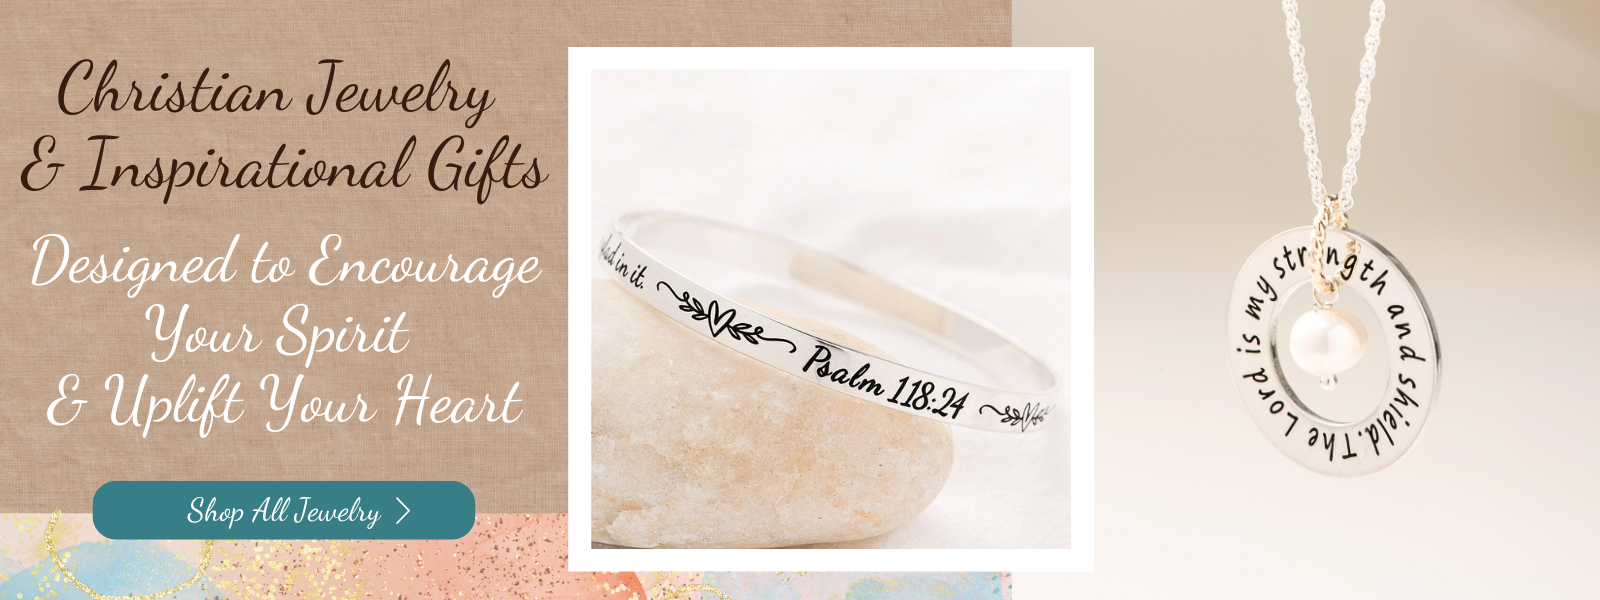 Clothed with Truth - Christian Jewelry & Gifts - Made in the USA